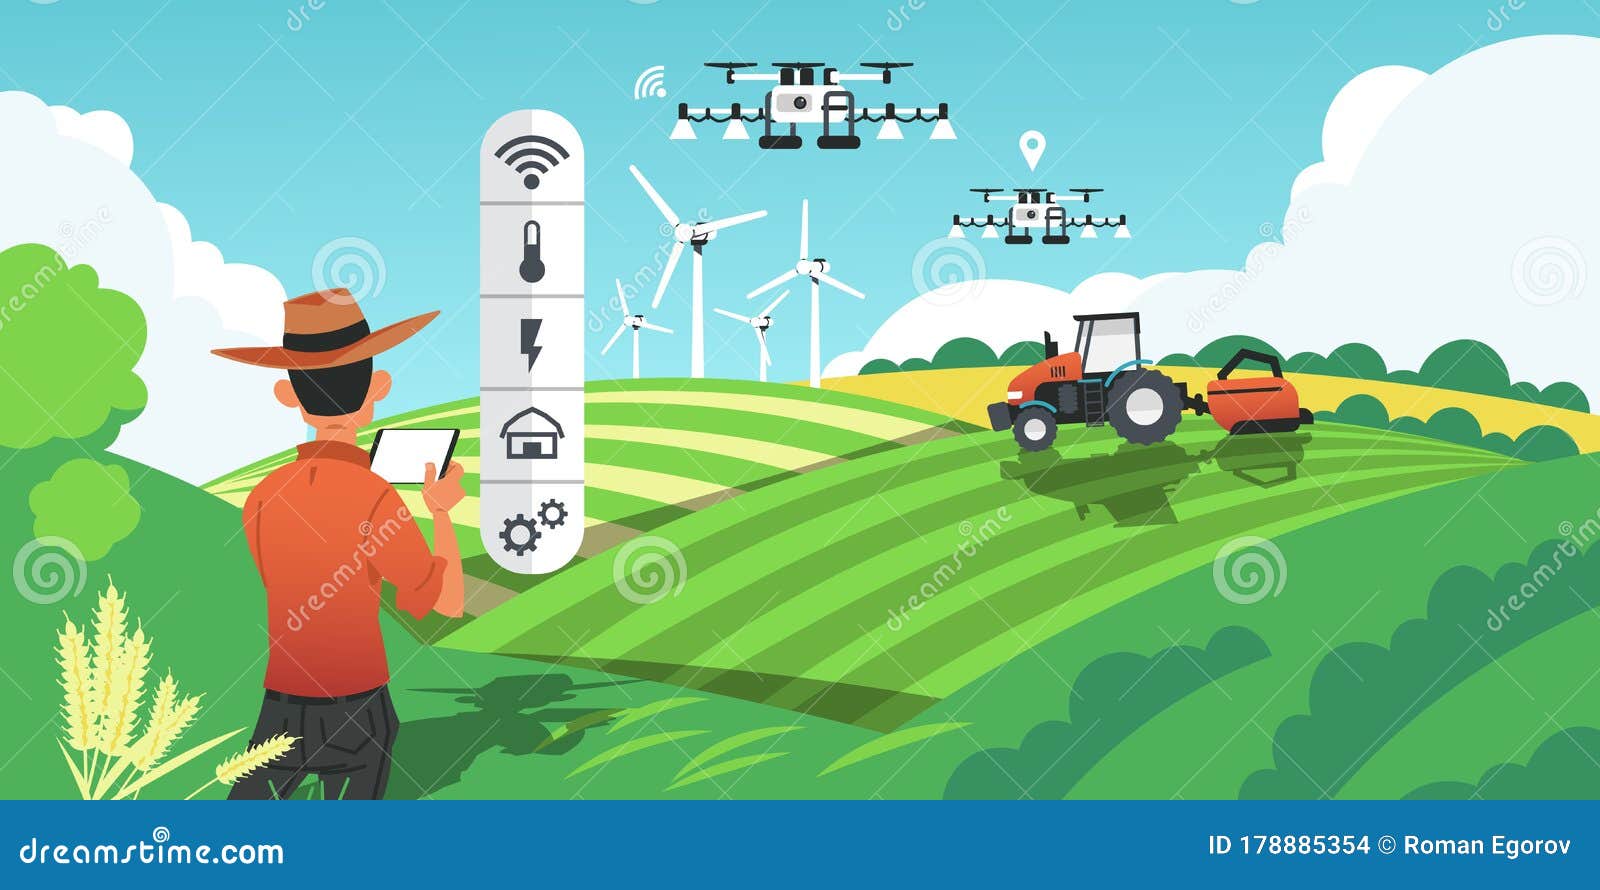 smart farming. growing crops and harvesting plants with futuristic technologies, drones on field and gps vehicles